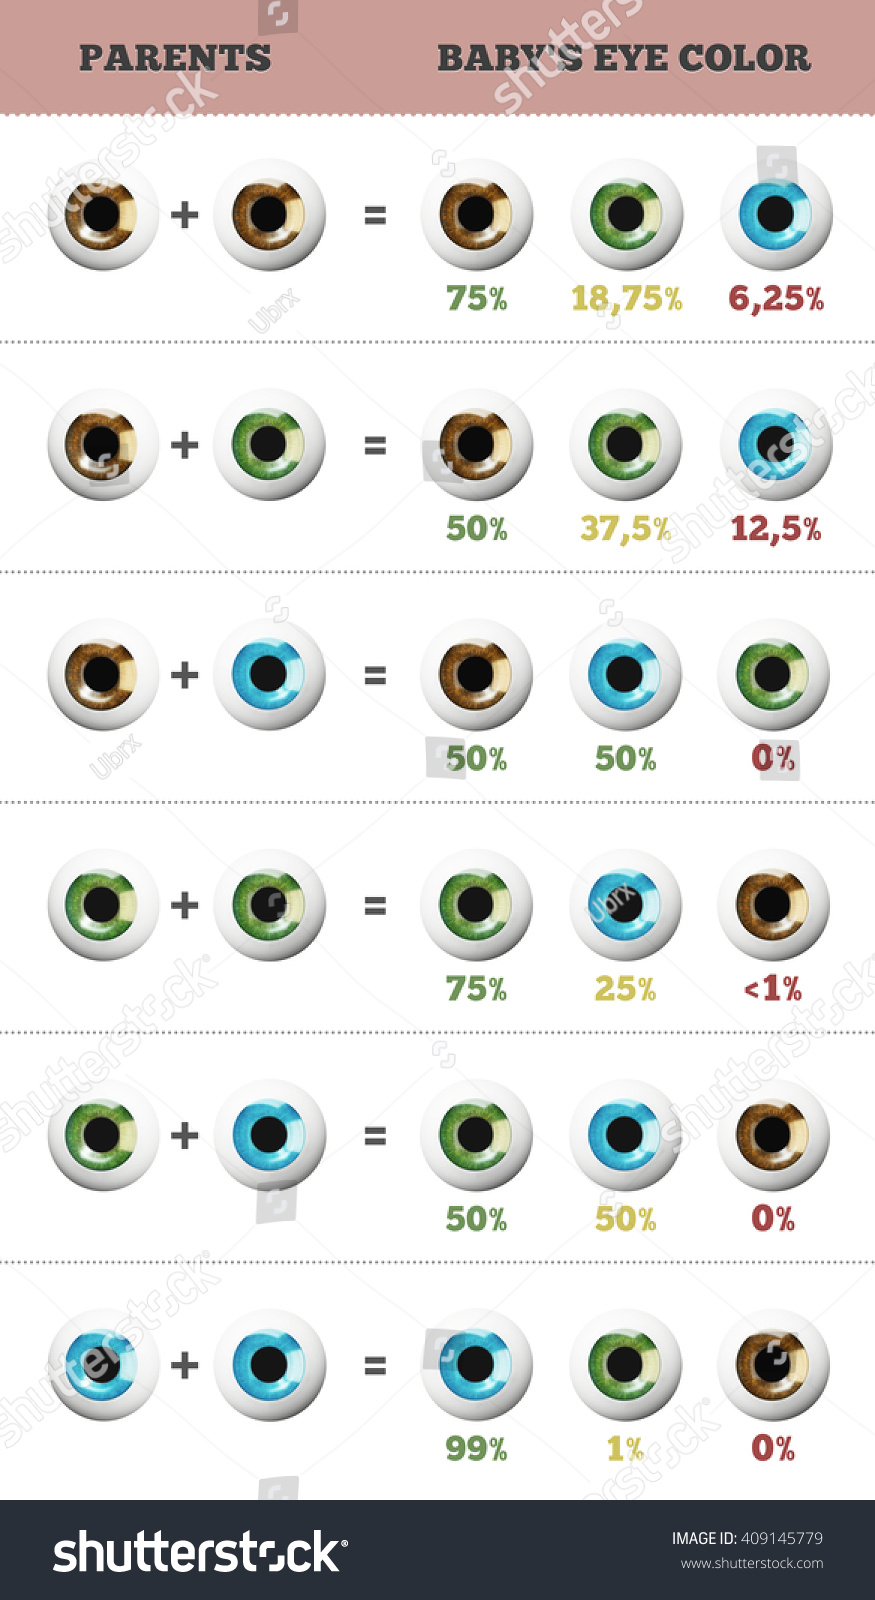 What Color Eyes Will My Baby Have Chart